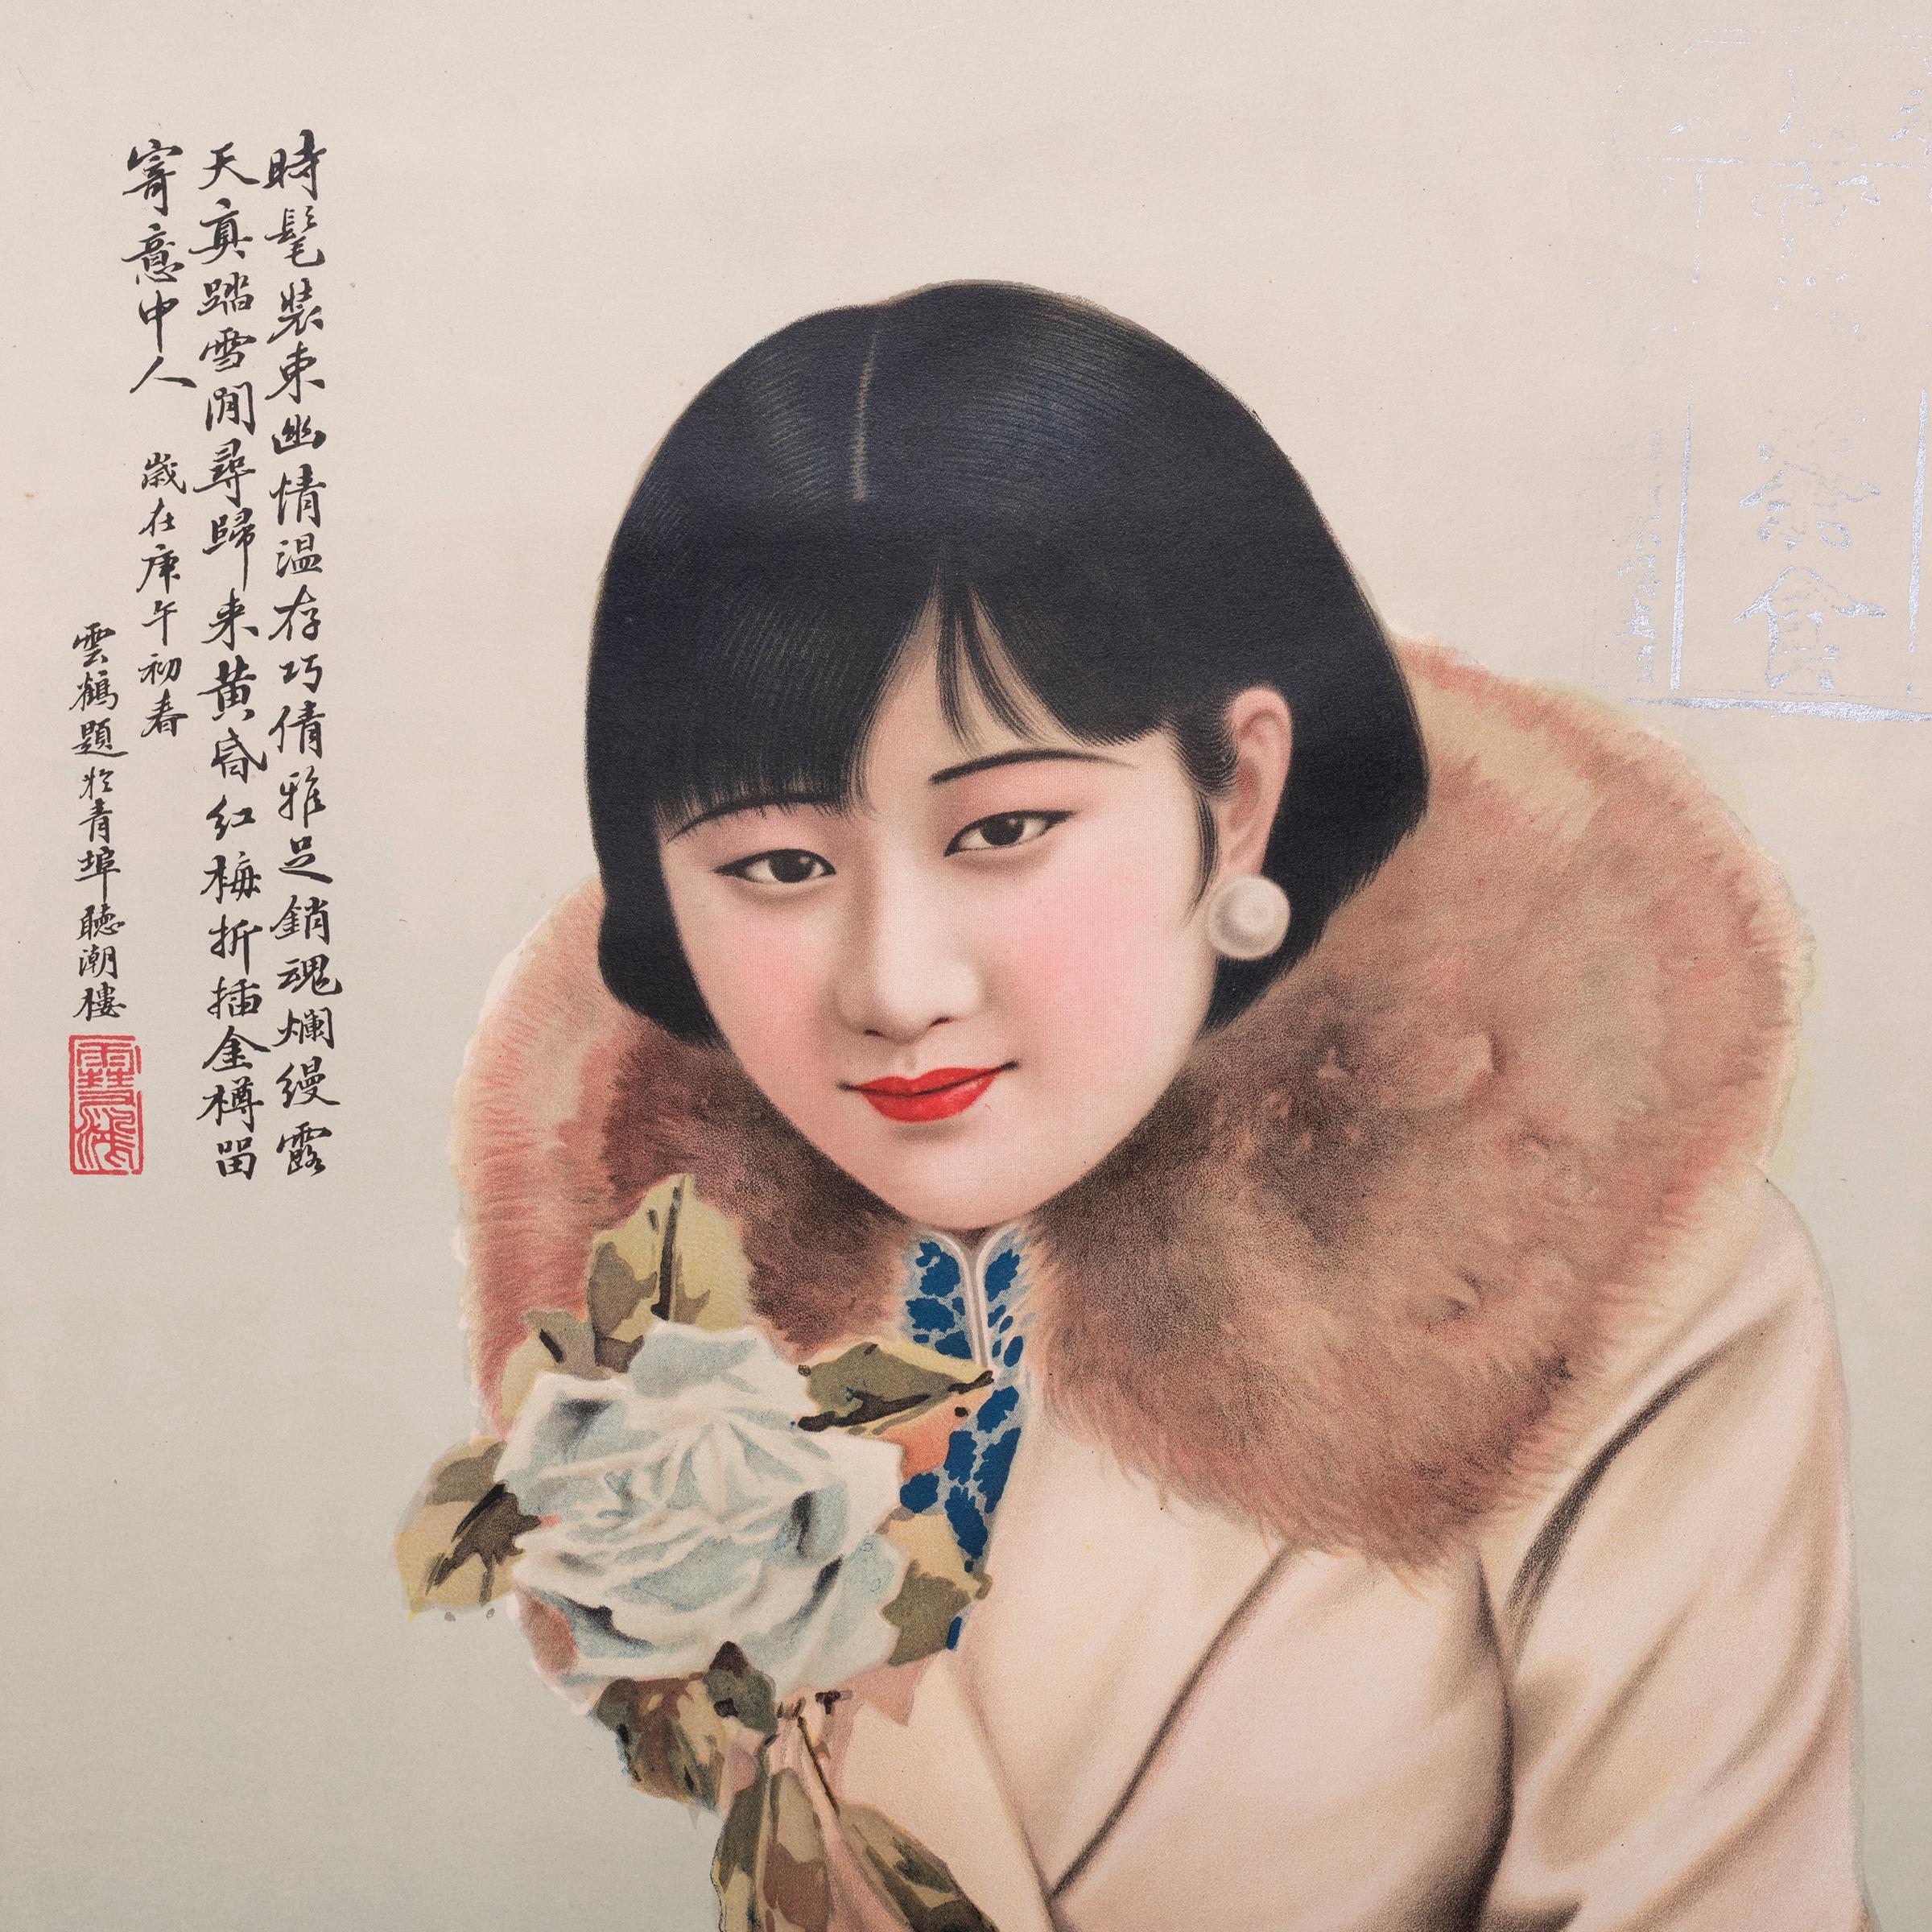 Vintage Chinese Lithograph Advertisement Poster - Print by Unknown